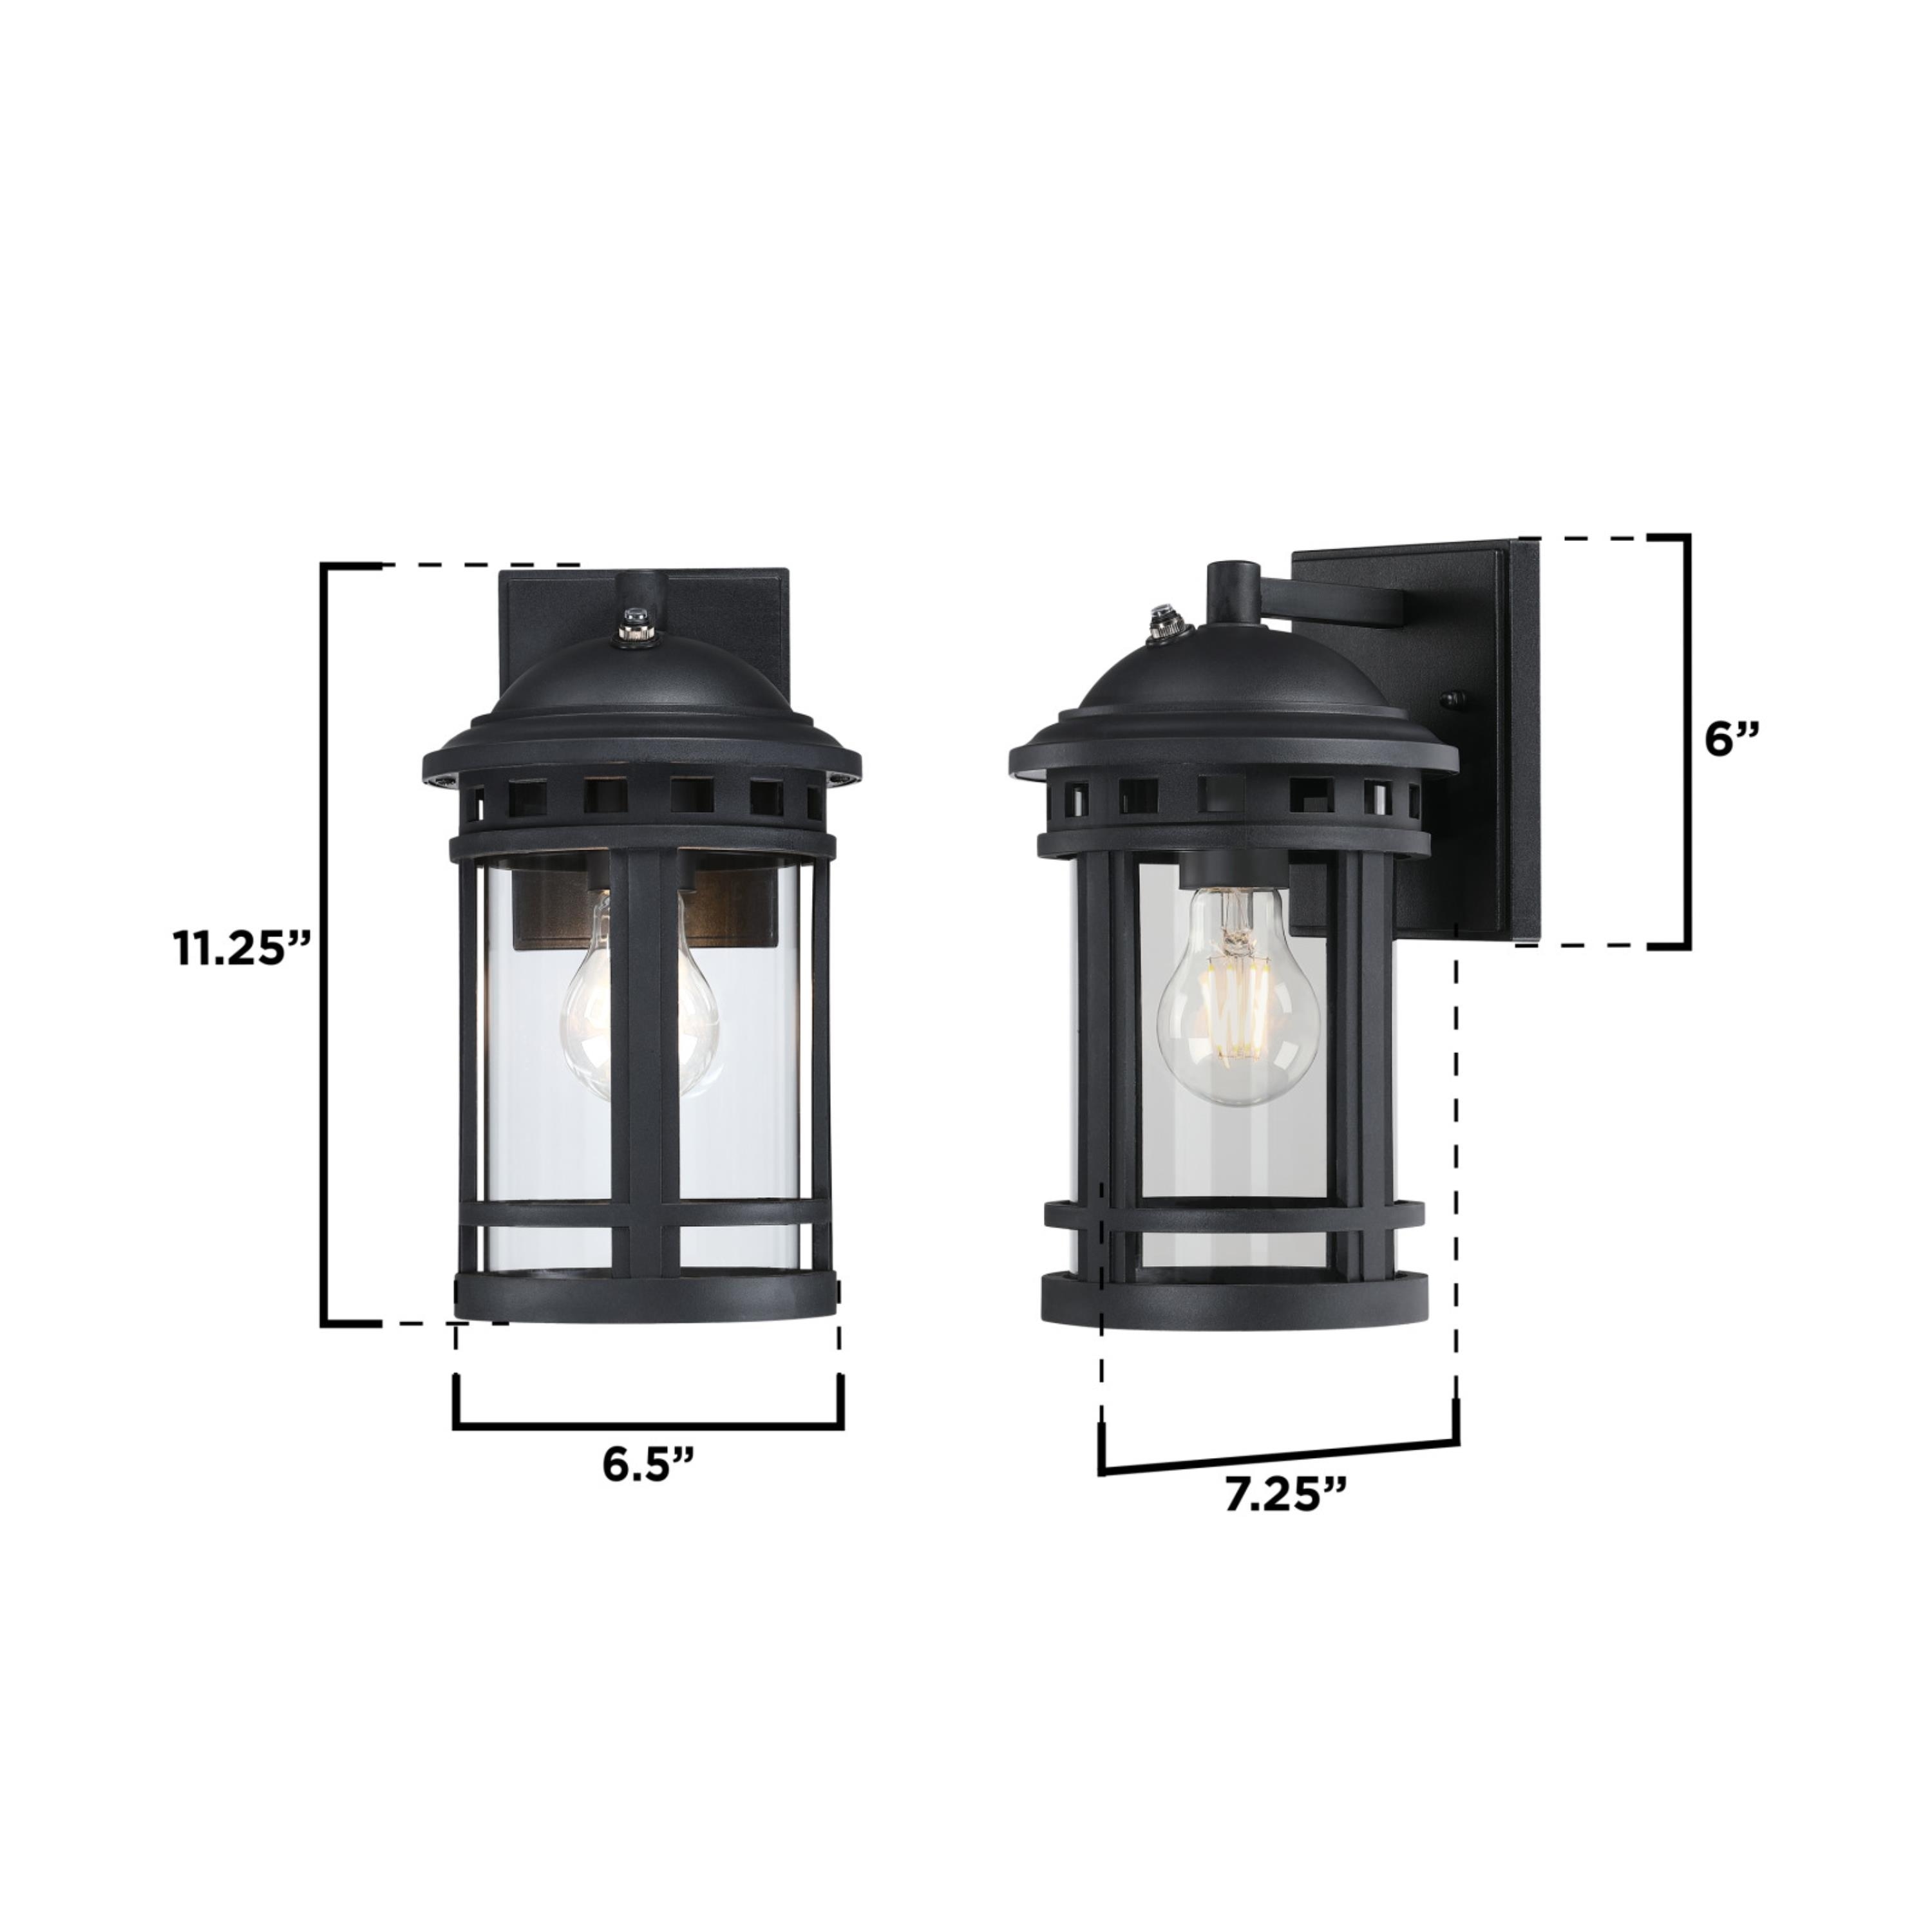 Westinghouse Lighting 6123200 Belon Outdoor Wall Fixture with Dusk to Dawn Sensor, Black - image 5 of 5